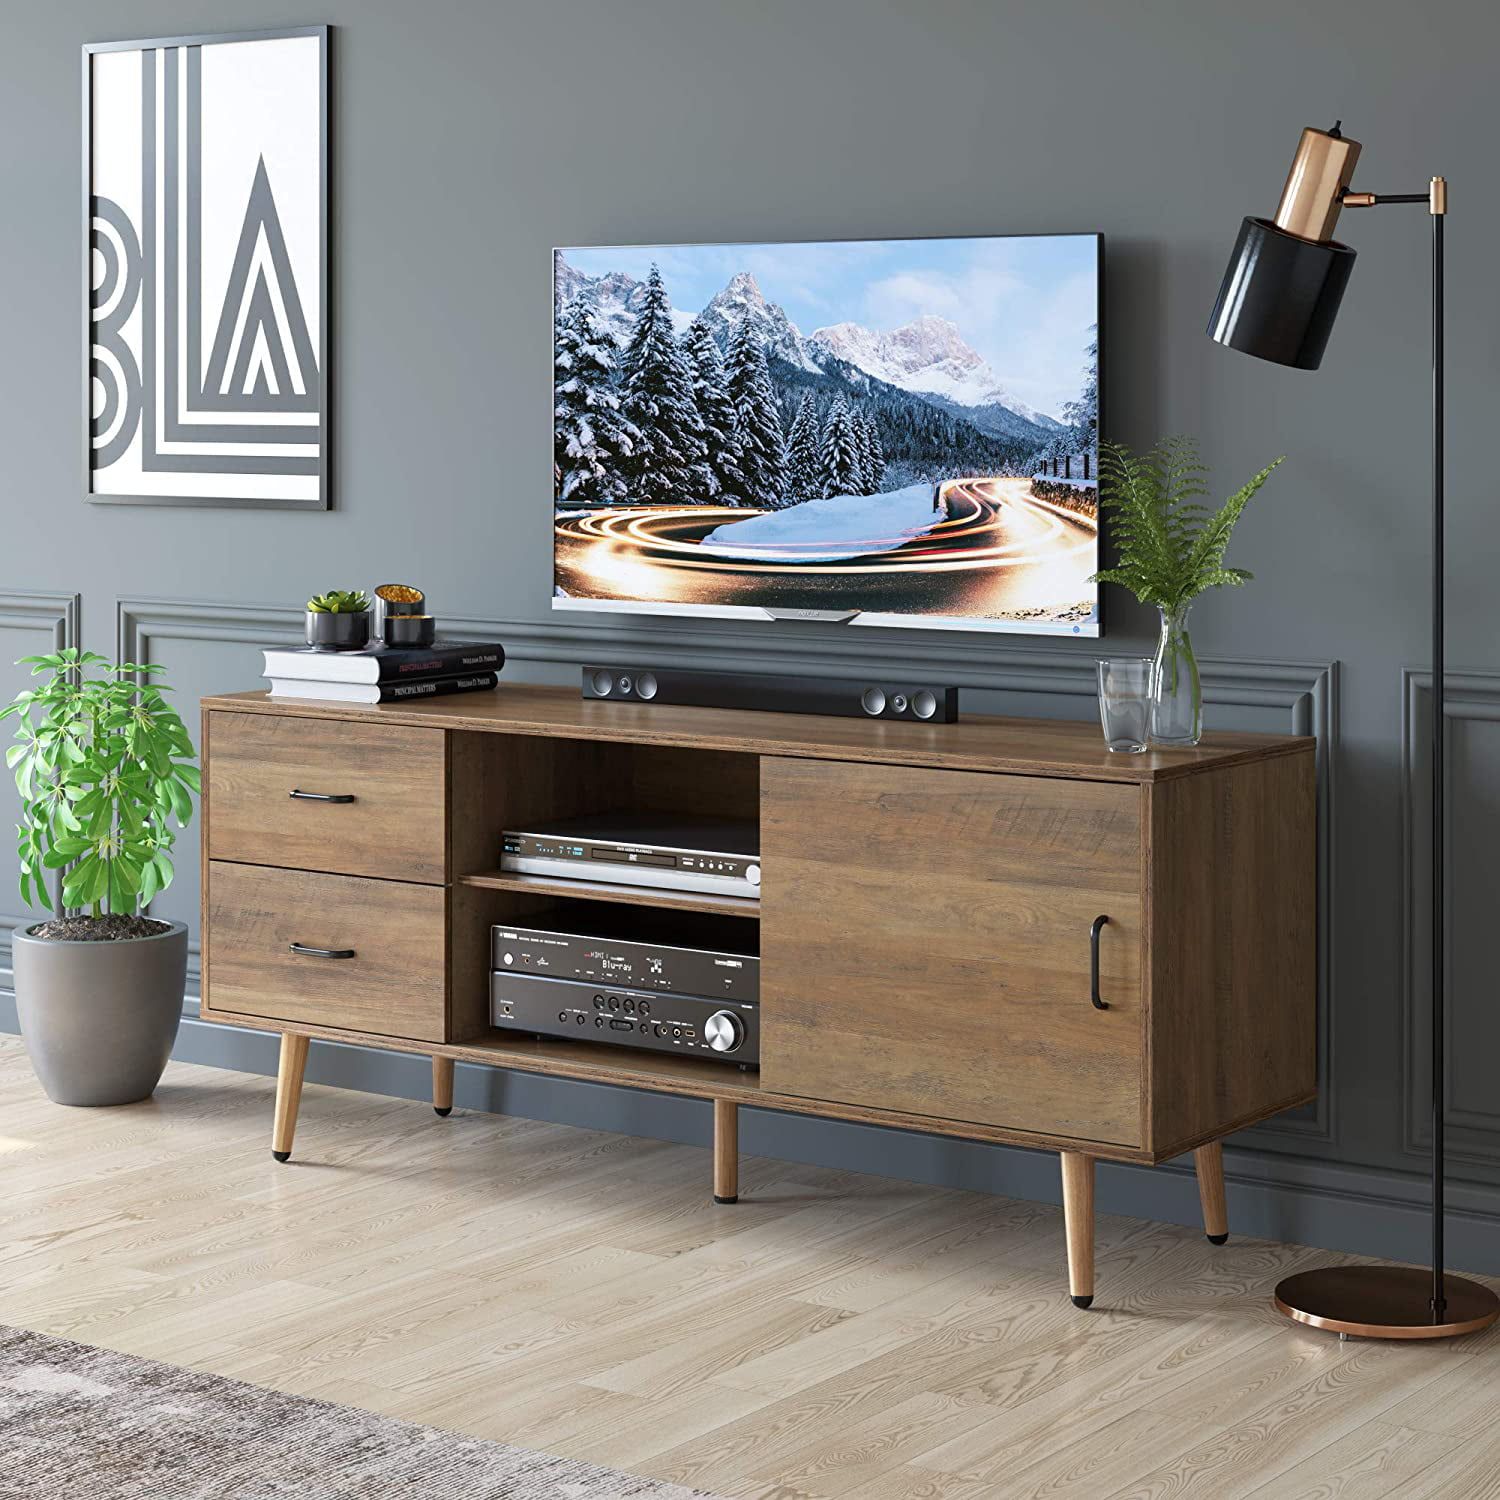 Homfa Tv Cabinet Media Console Table, Wood Tv Stand For Tvs Up To 60 Intended For Dual Use Storage Cabinet Tv Stands (Gallery 1 of 20)